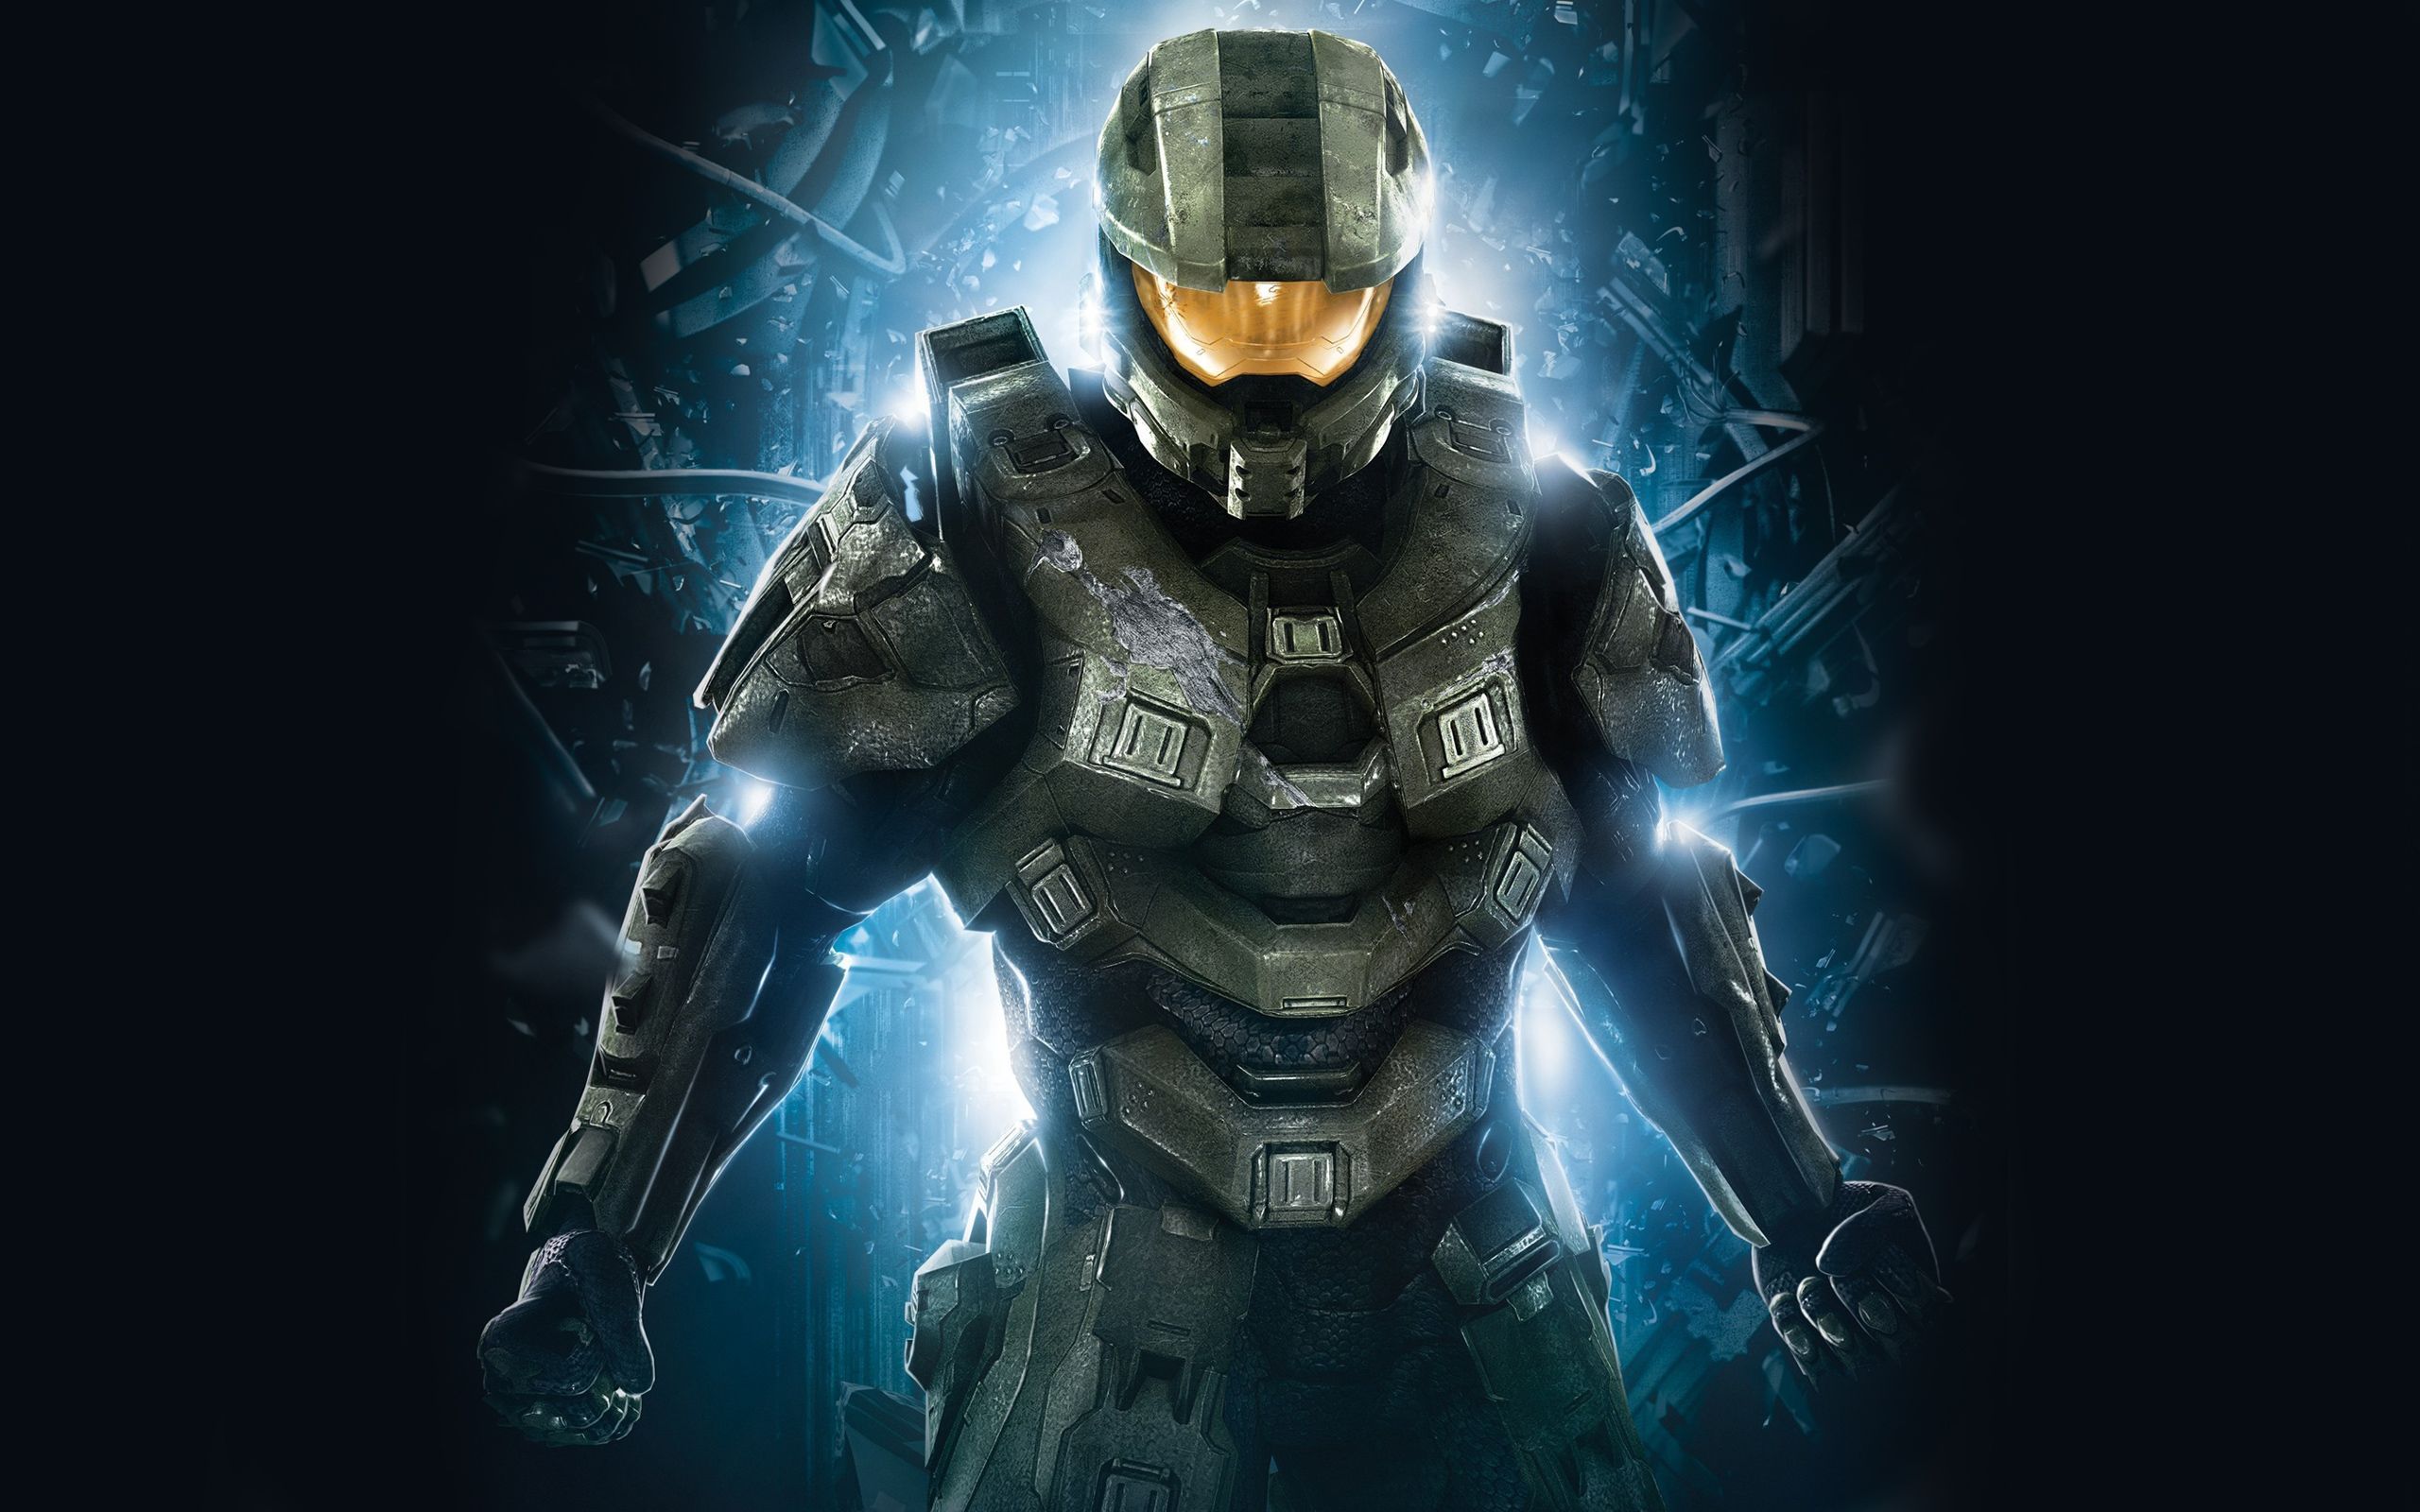 Master Chief in Halo 4 Wallpapers | HD Wallpapers